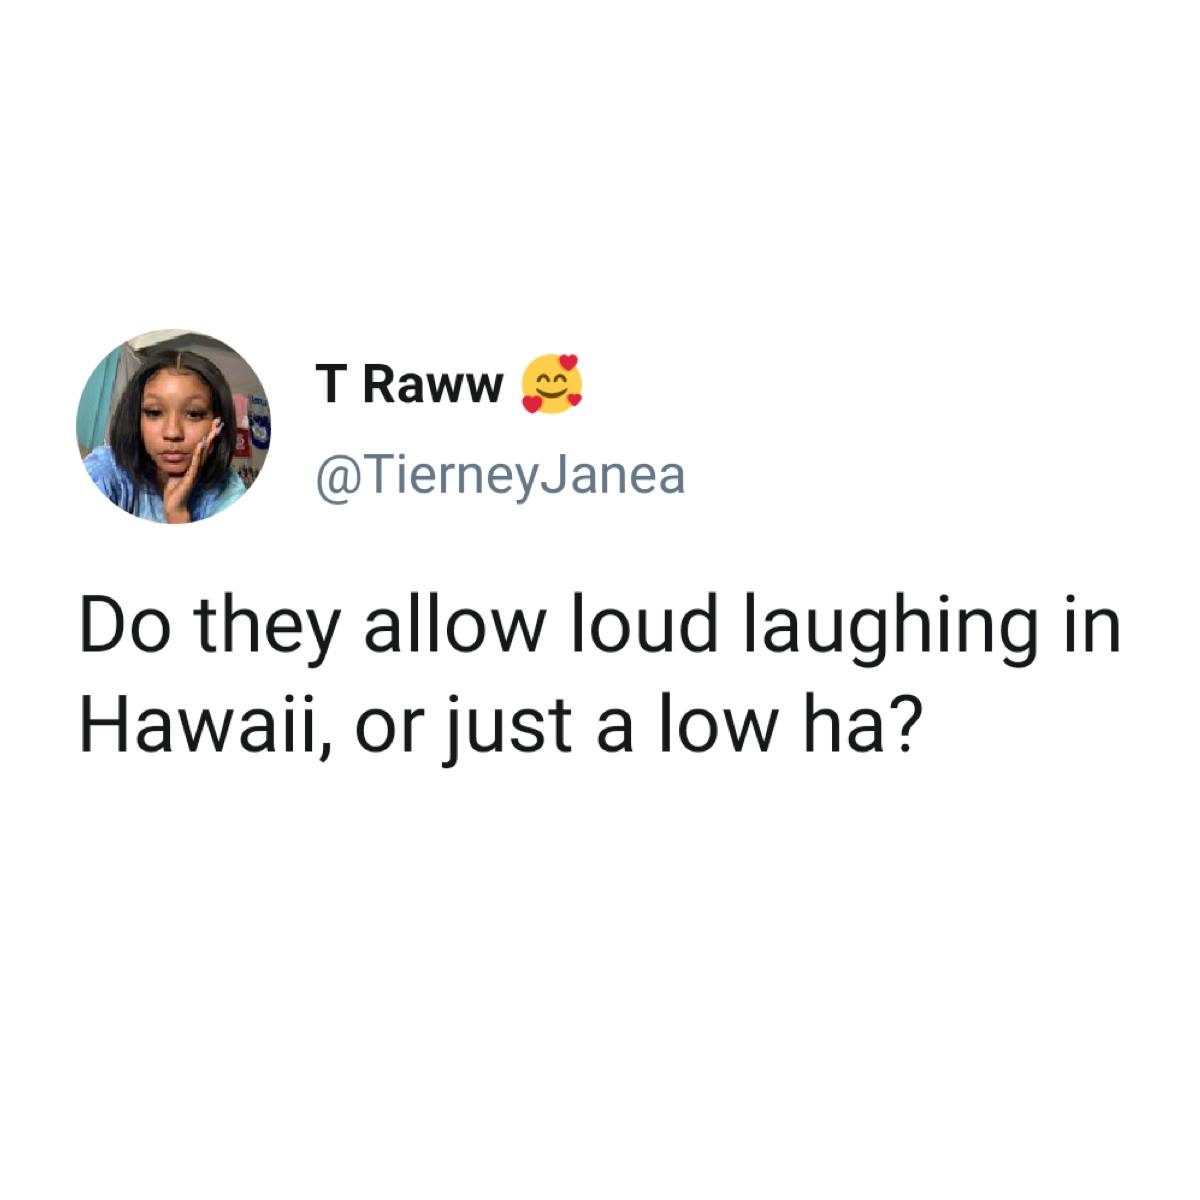 T Raww Do they allow loud laughing in Hawaii, or just a low ha?